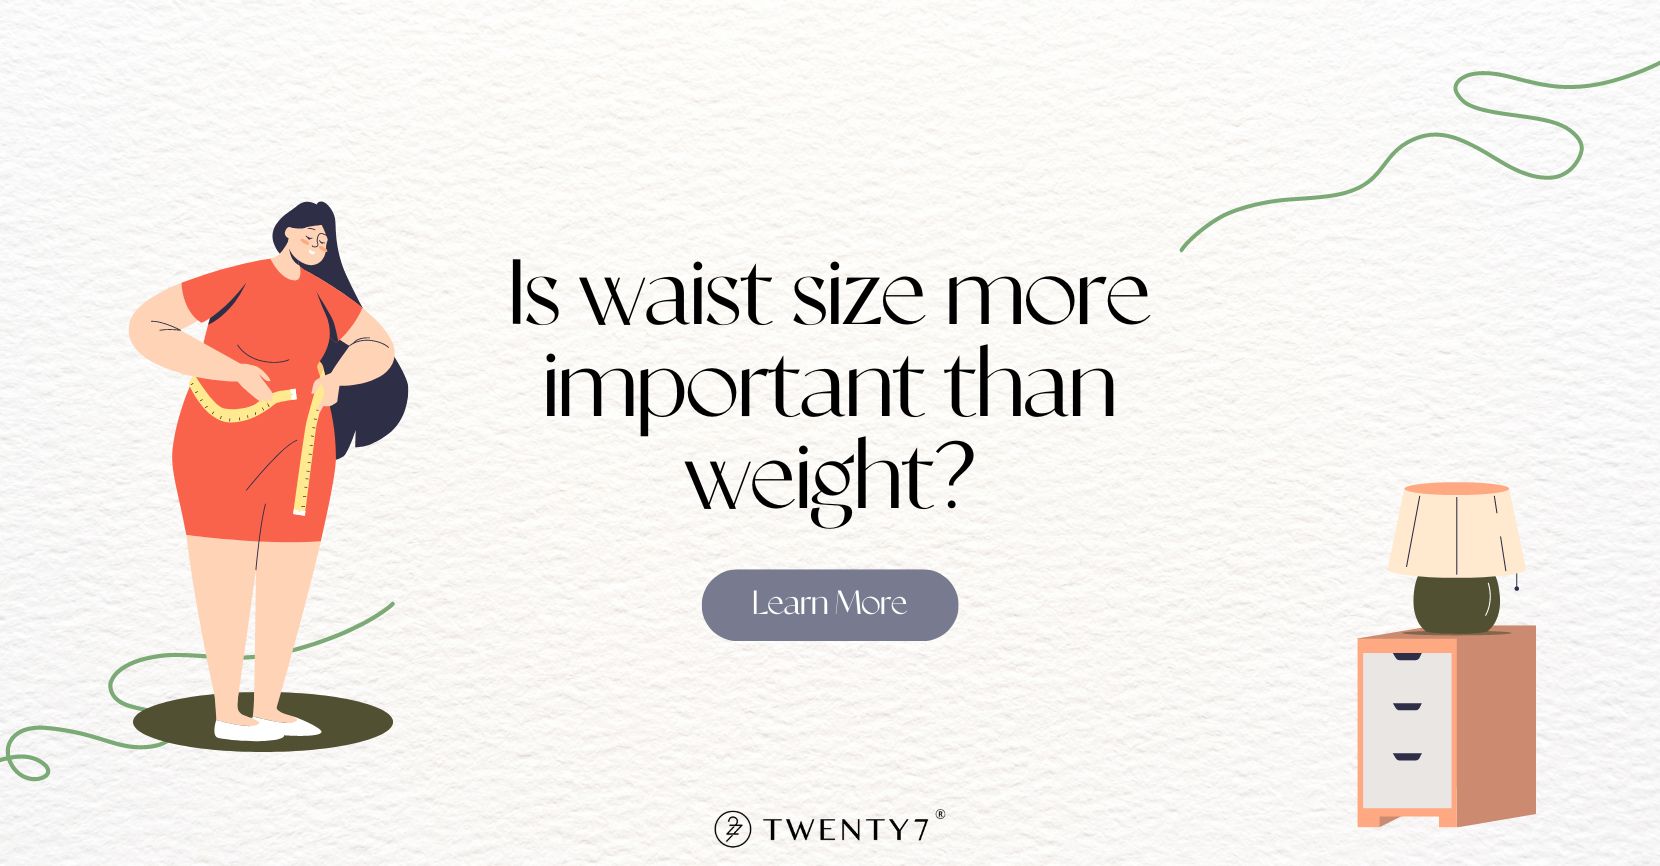 Is waist size more important than weight